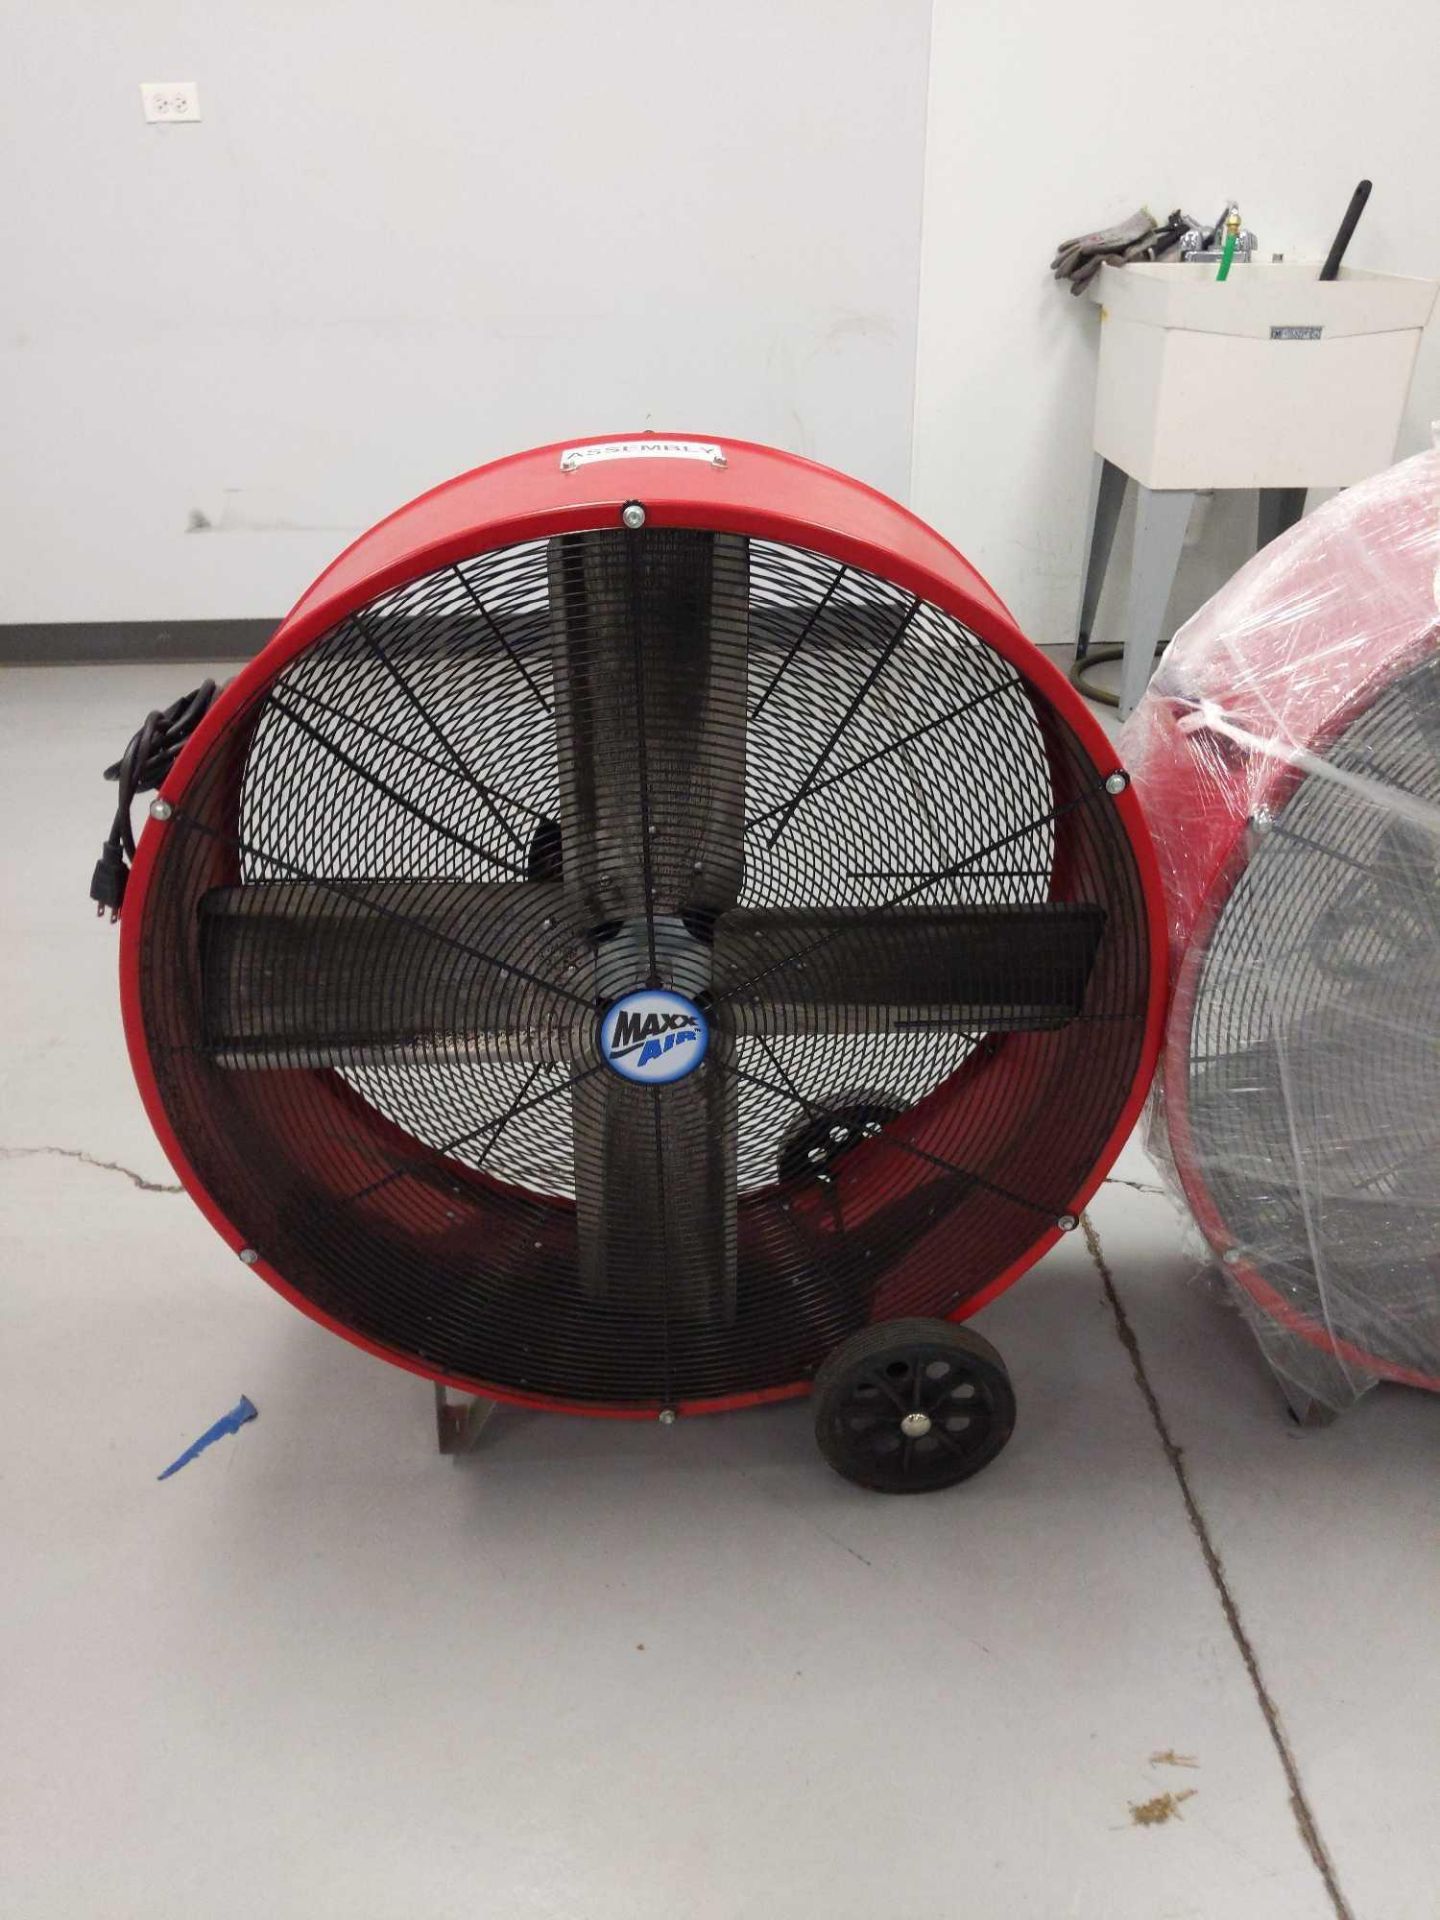 2 Maxx Air Fans with Wheels - Image 2 of 6